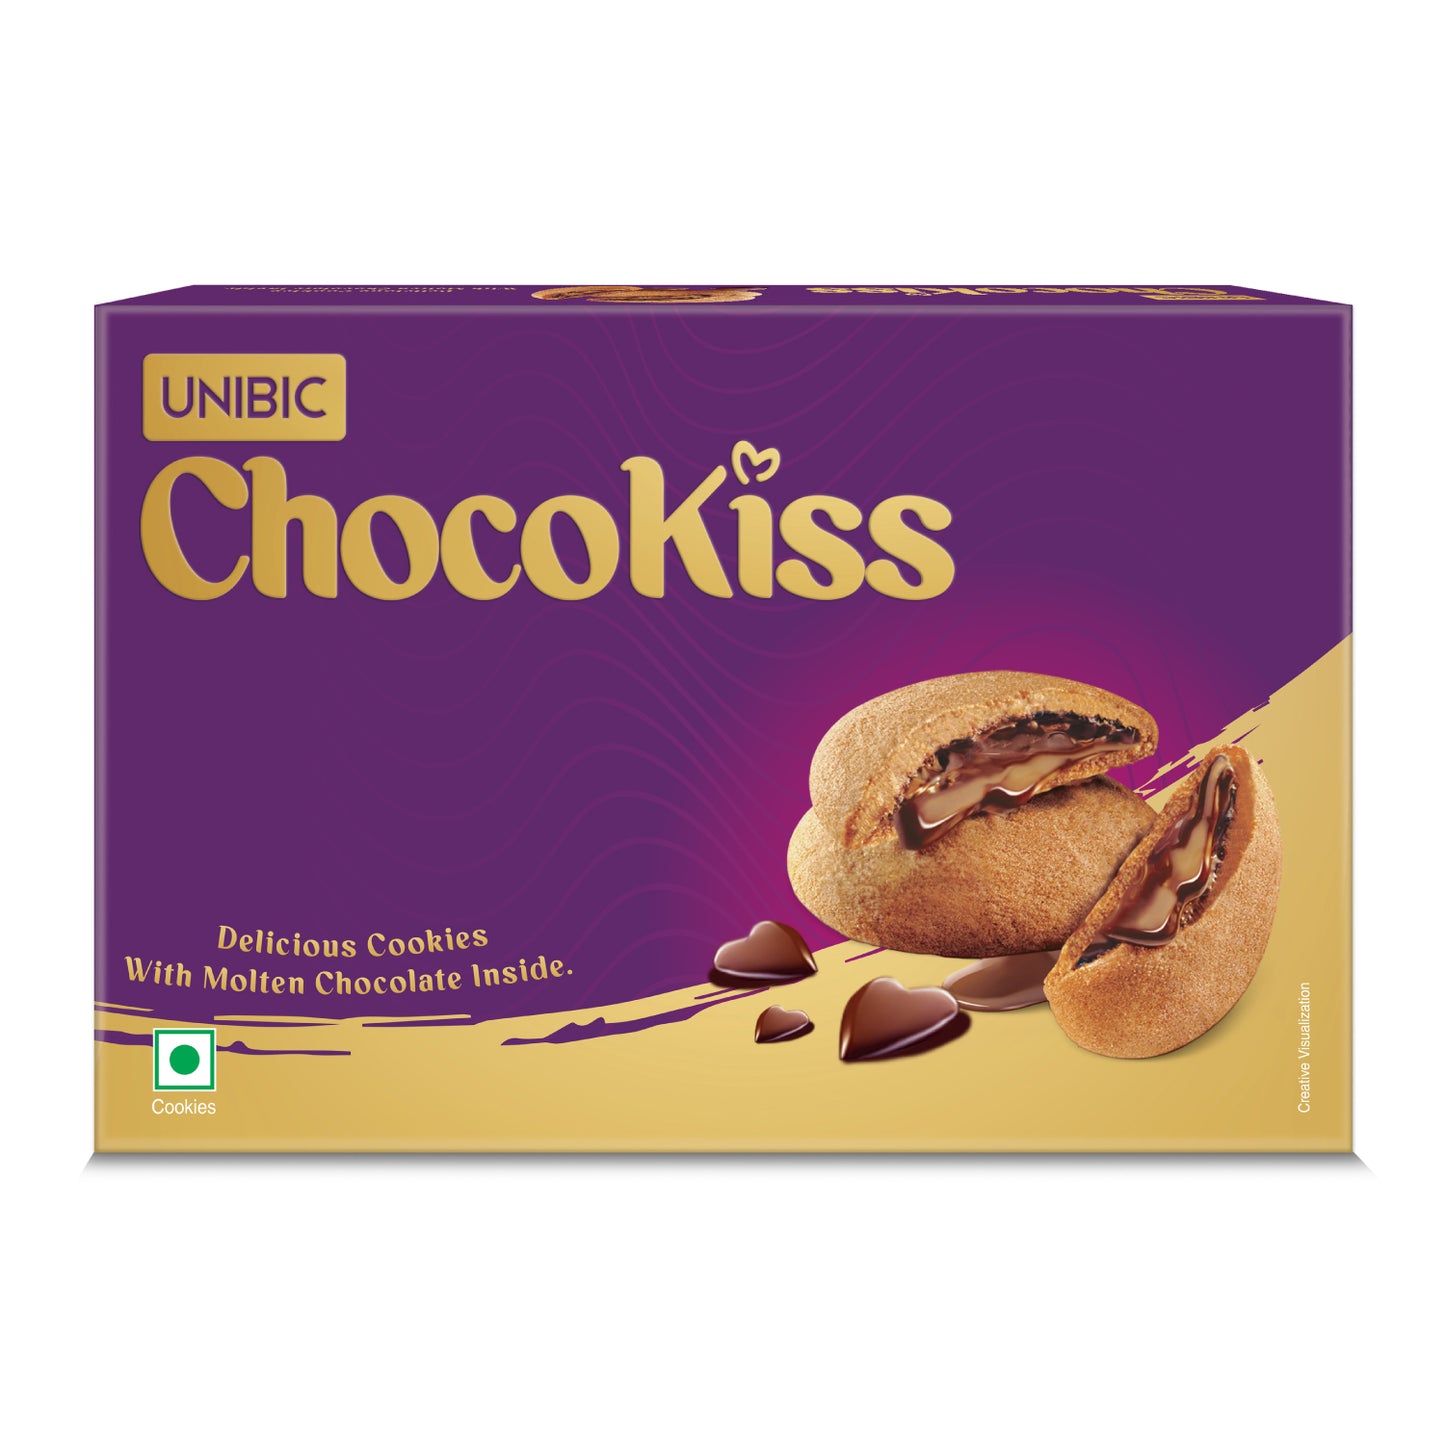 UNIBIC Choco Kiss - Centre Filled Cookies, 250 g